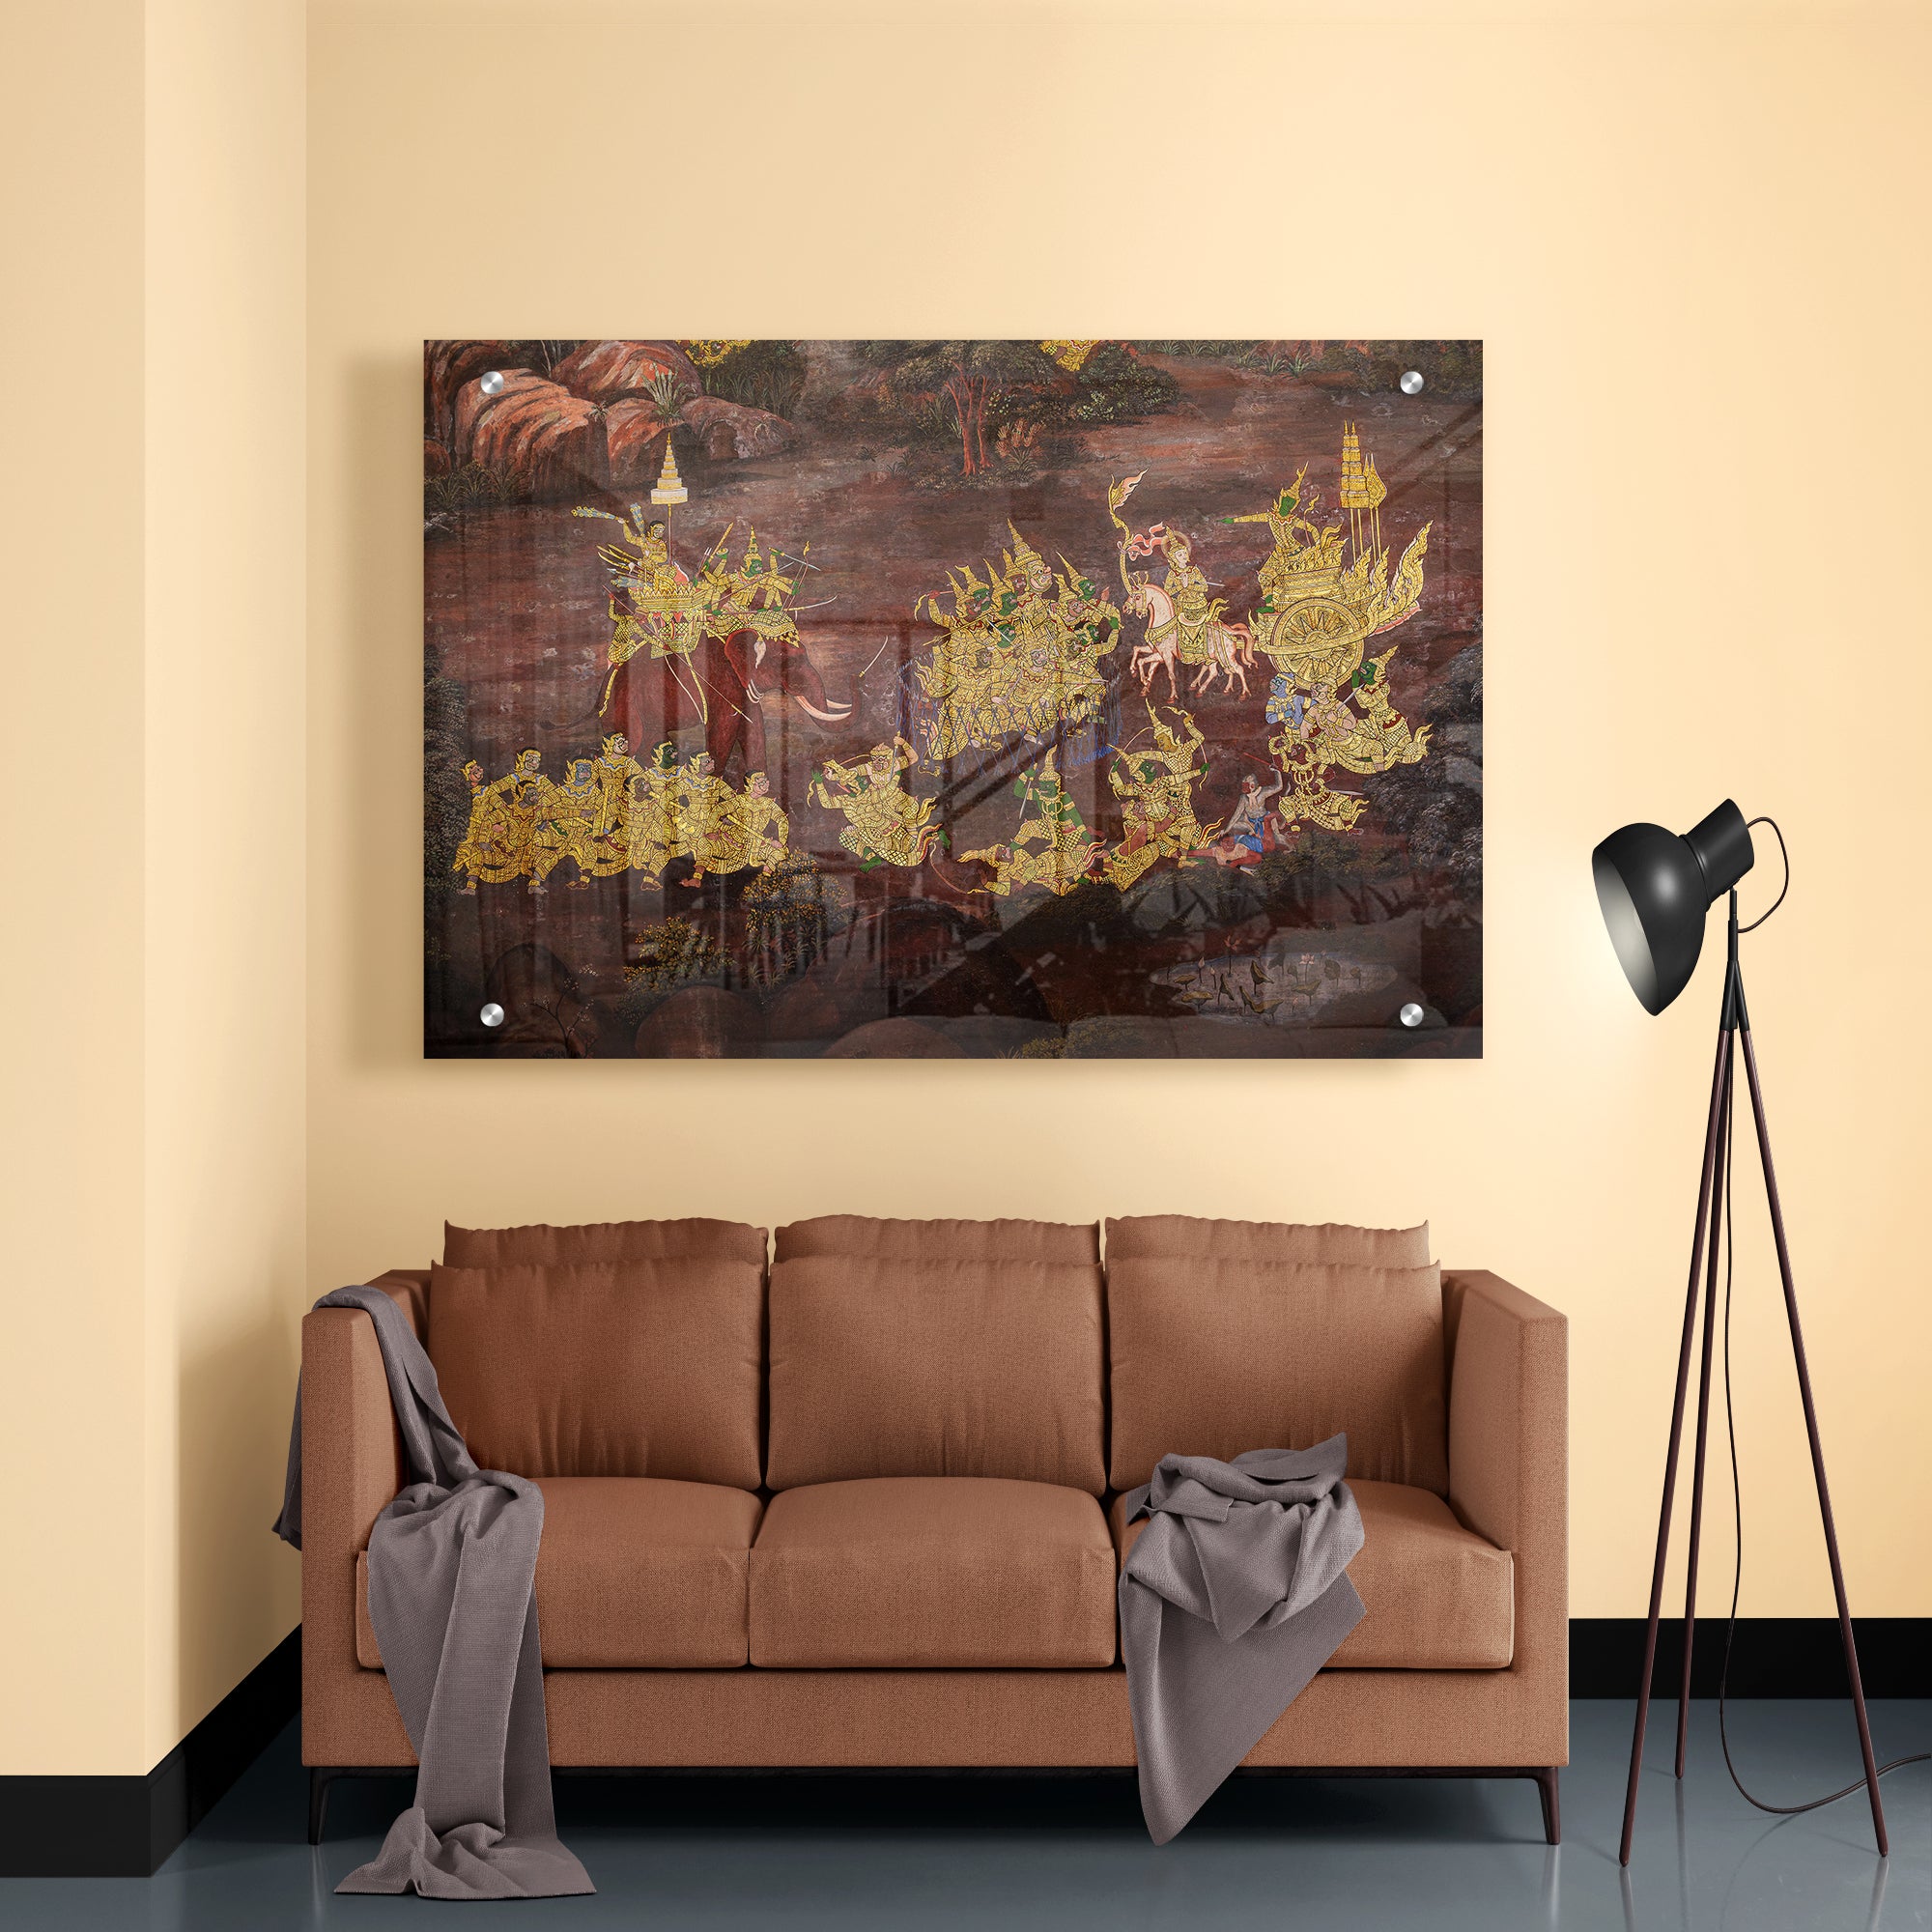 Gold Color Of Old Mural Is The Story Of Ramakian Premium Acrylic Wall Painting